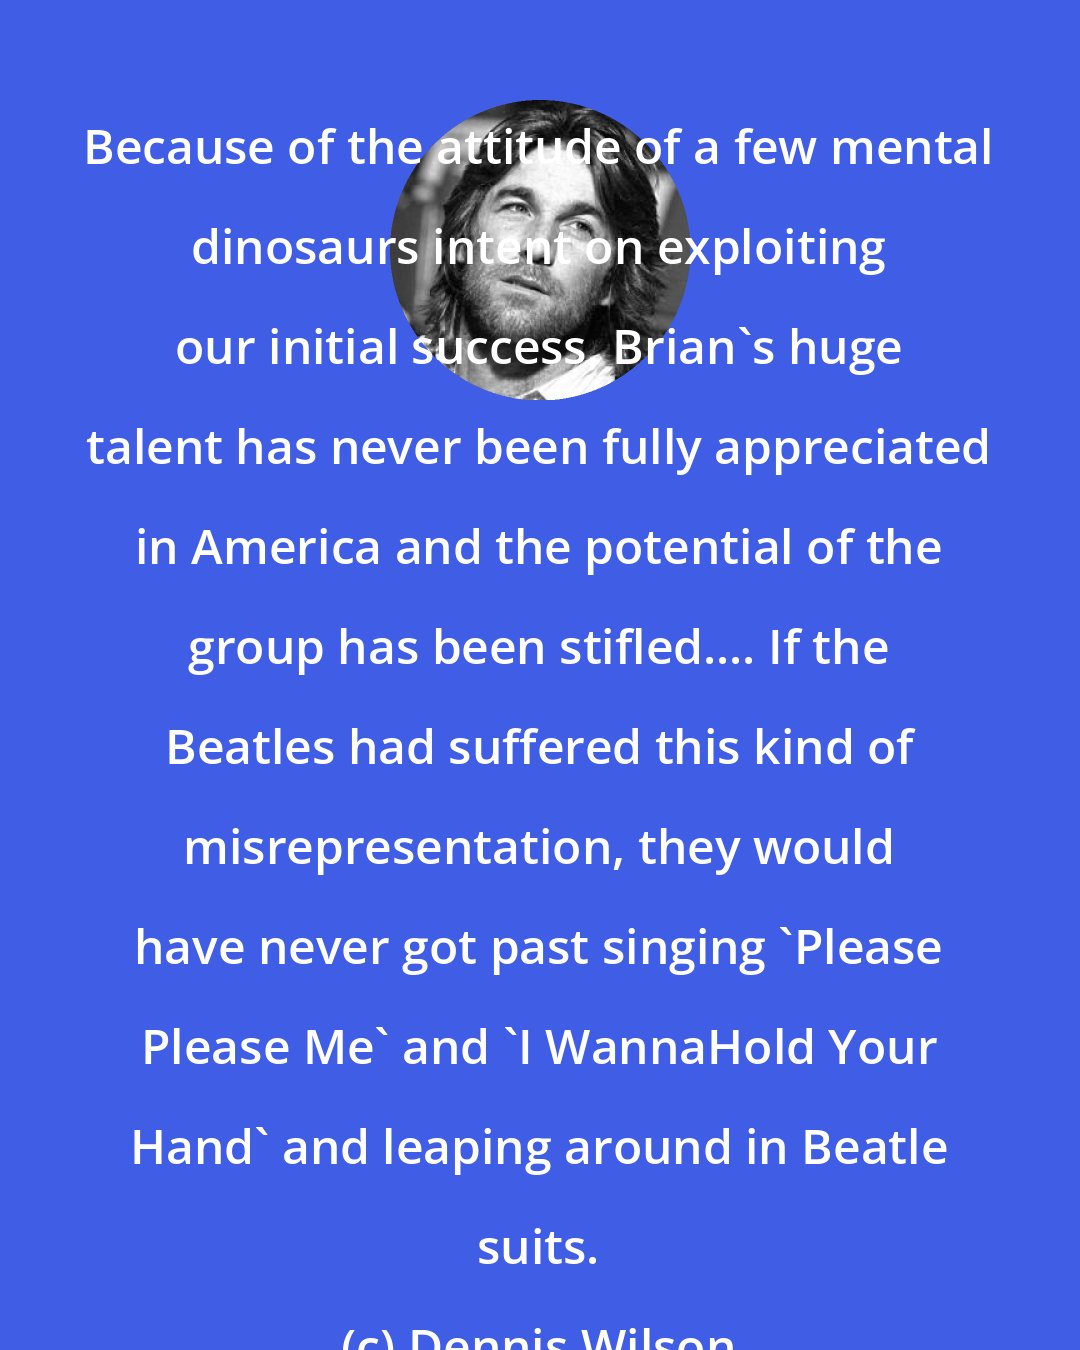 Dennis Wilson: Because of the attitude of a few mental dinosaurs intent on exploiting our initial success, Brian's huge talent has never been fully appreciated in America and the potential of the group has been stifled.... If the Beatles had suffered this kind of misrepresentation, they would have never got past singing 'Please Please Me' and 'I WannaHold Your Hand' and leaping around in Beatle suits.